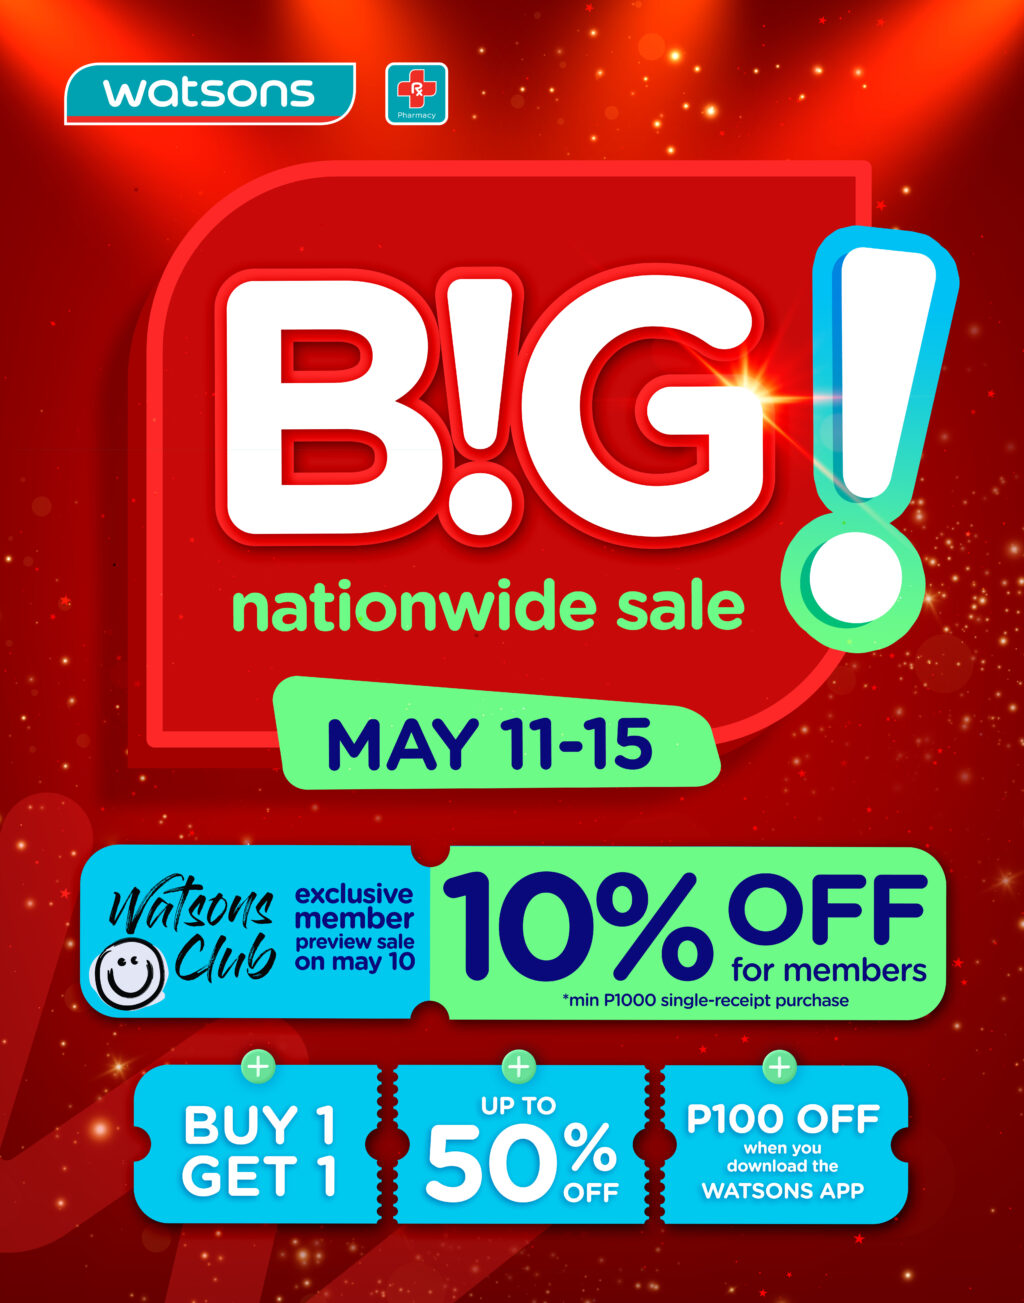 Watsons Big Nationwide Sale on May 11 to 15, 2023. Watsons club members get additional 50% Off. Buy 1 get one offers, 50% offers, and P100 off when downloading the Watsons App.